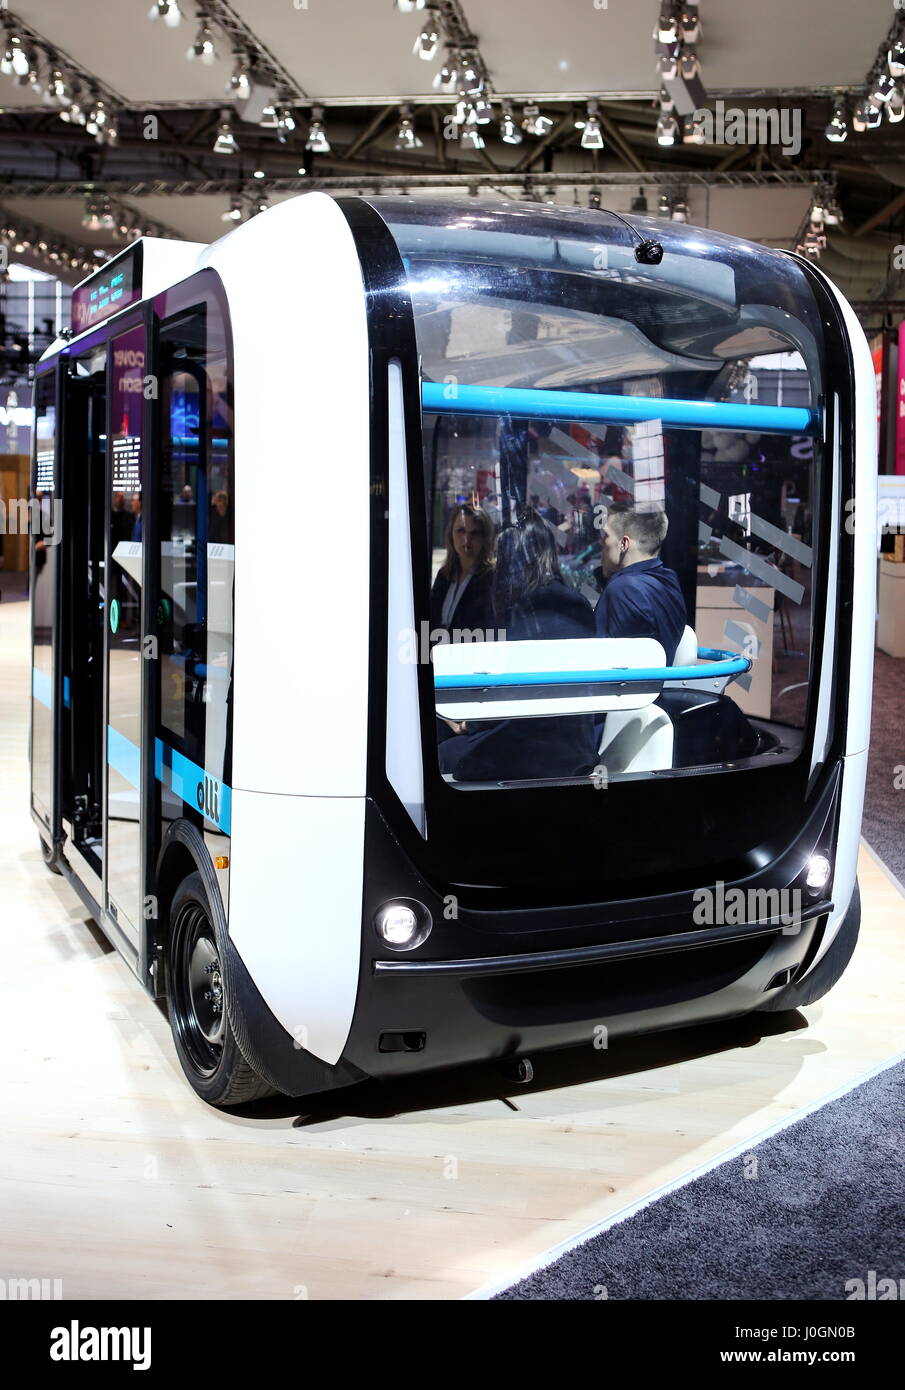 Hanover, Germany. 19th March, 2017. Self-driving electric minibus 'Olli', developed by Local Motors in cooperation with IBM. IBM-System Watson IoT (Internet of Things) controls the autonomous driving. CeBIT 2017, ICT trade fair, lead theme 'd!conomy - no limits'. Photocredit: Christian Lademann Stock Photo